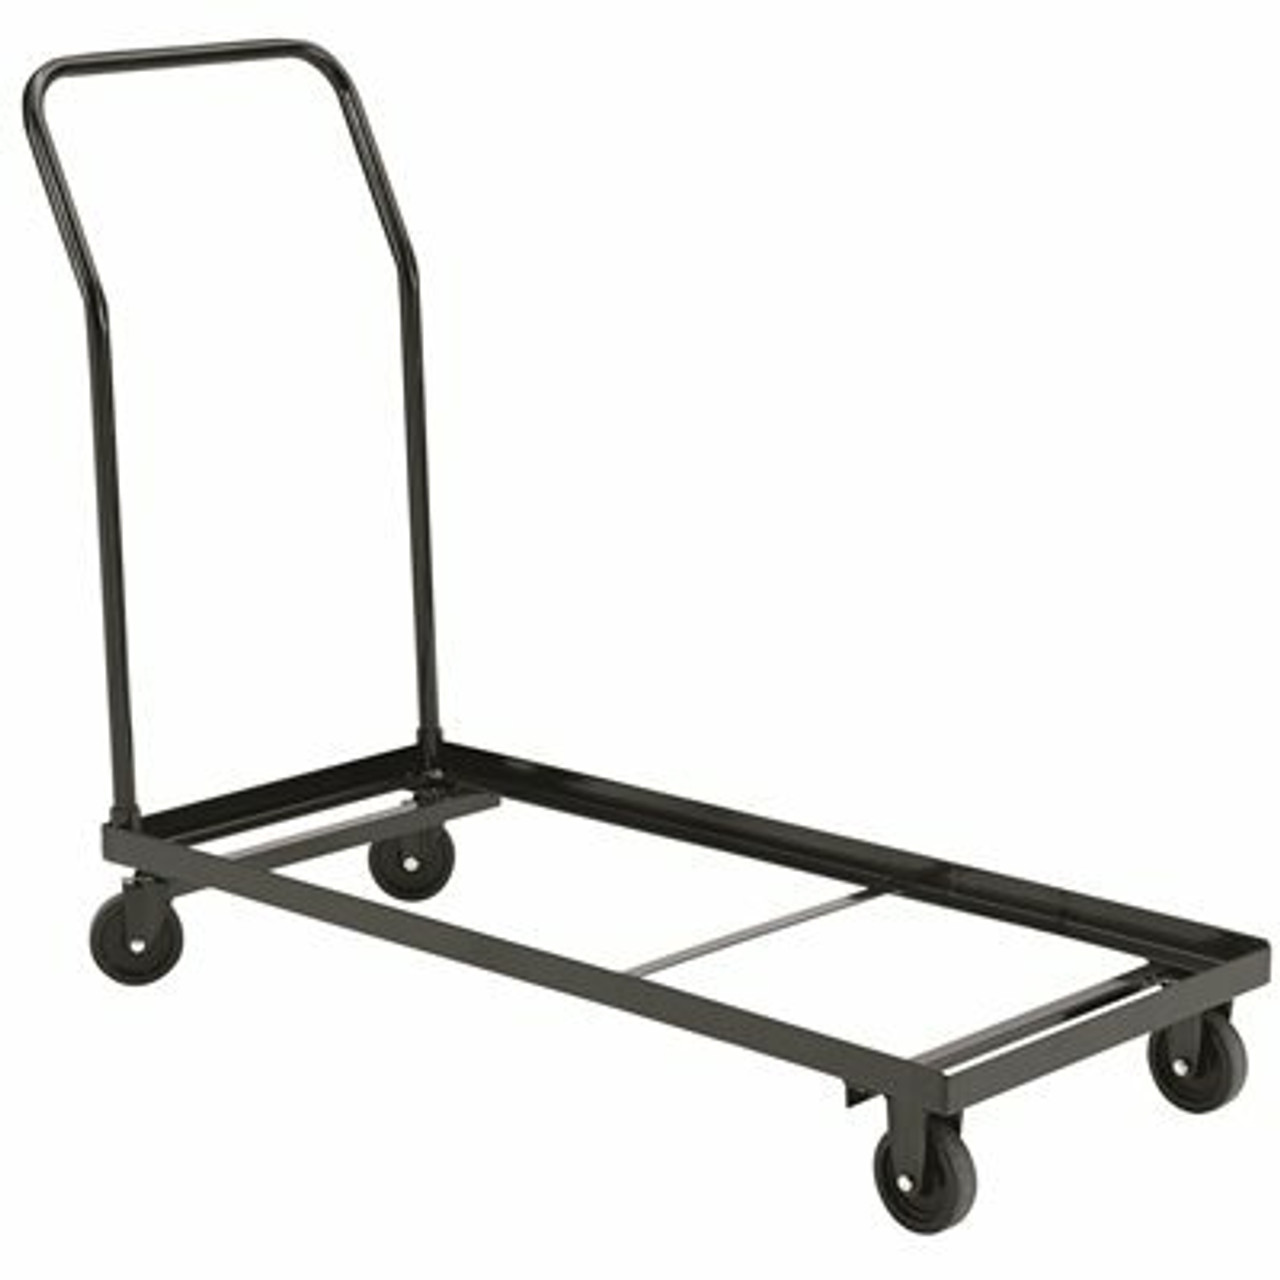 National Public Seating 1100 Lbs. Weight Capacity Folding Chair Dolly For Storage And Transport - 2487458